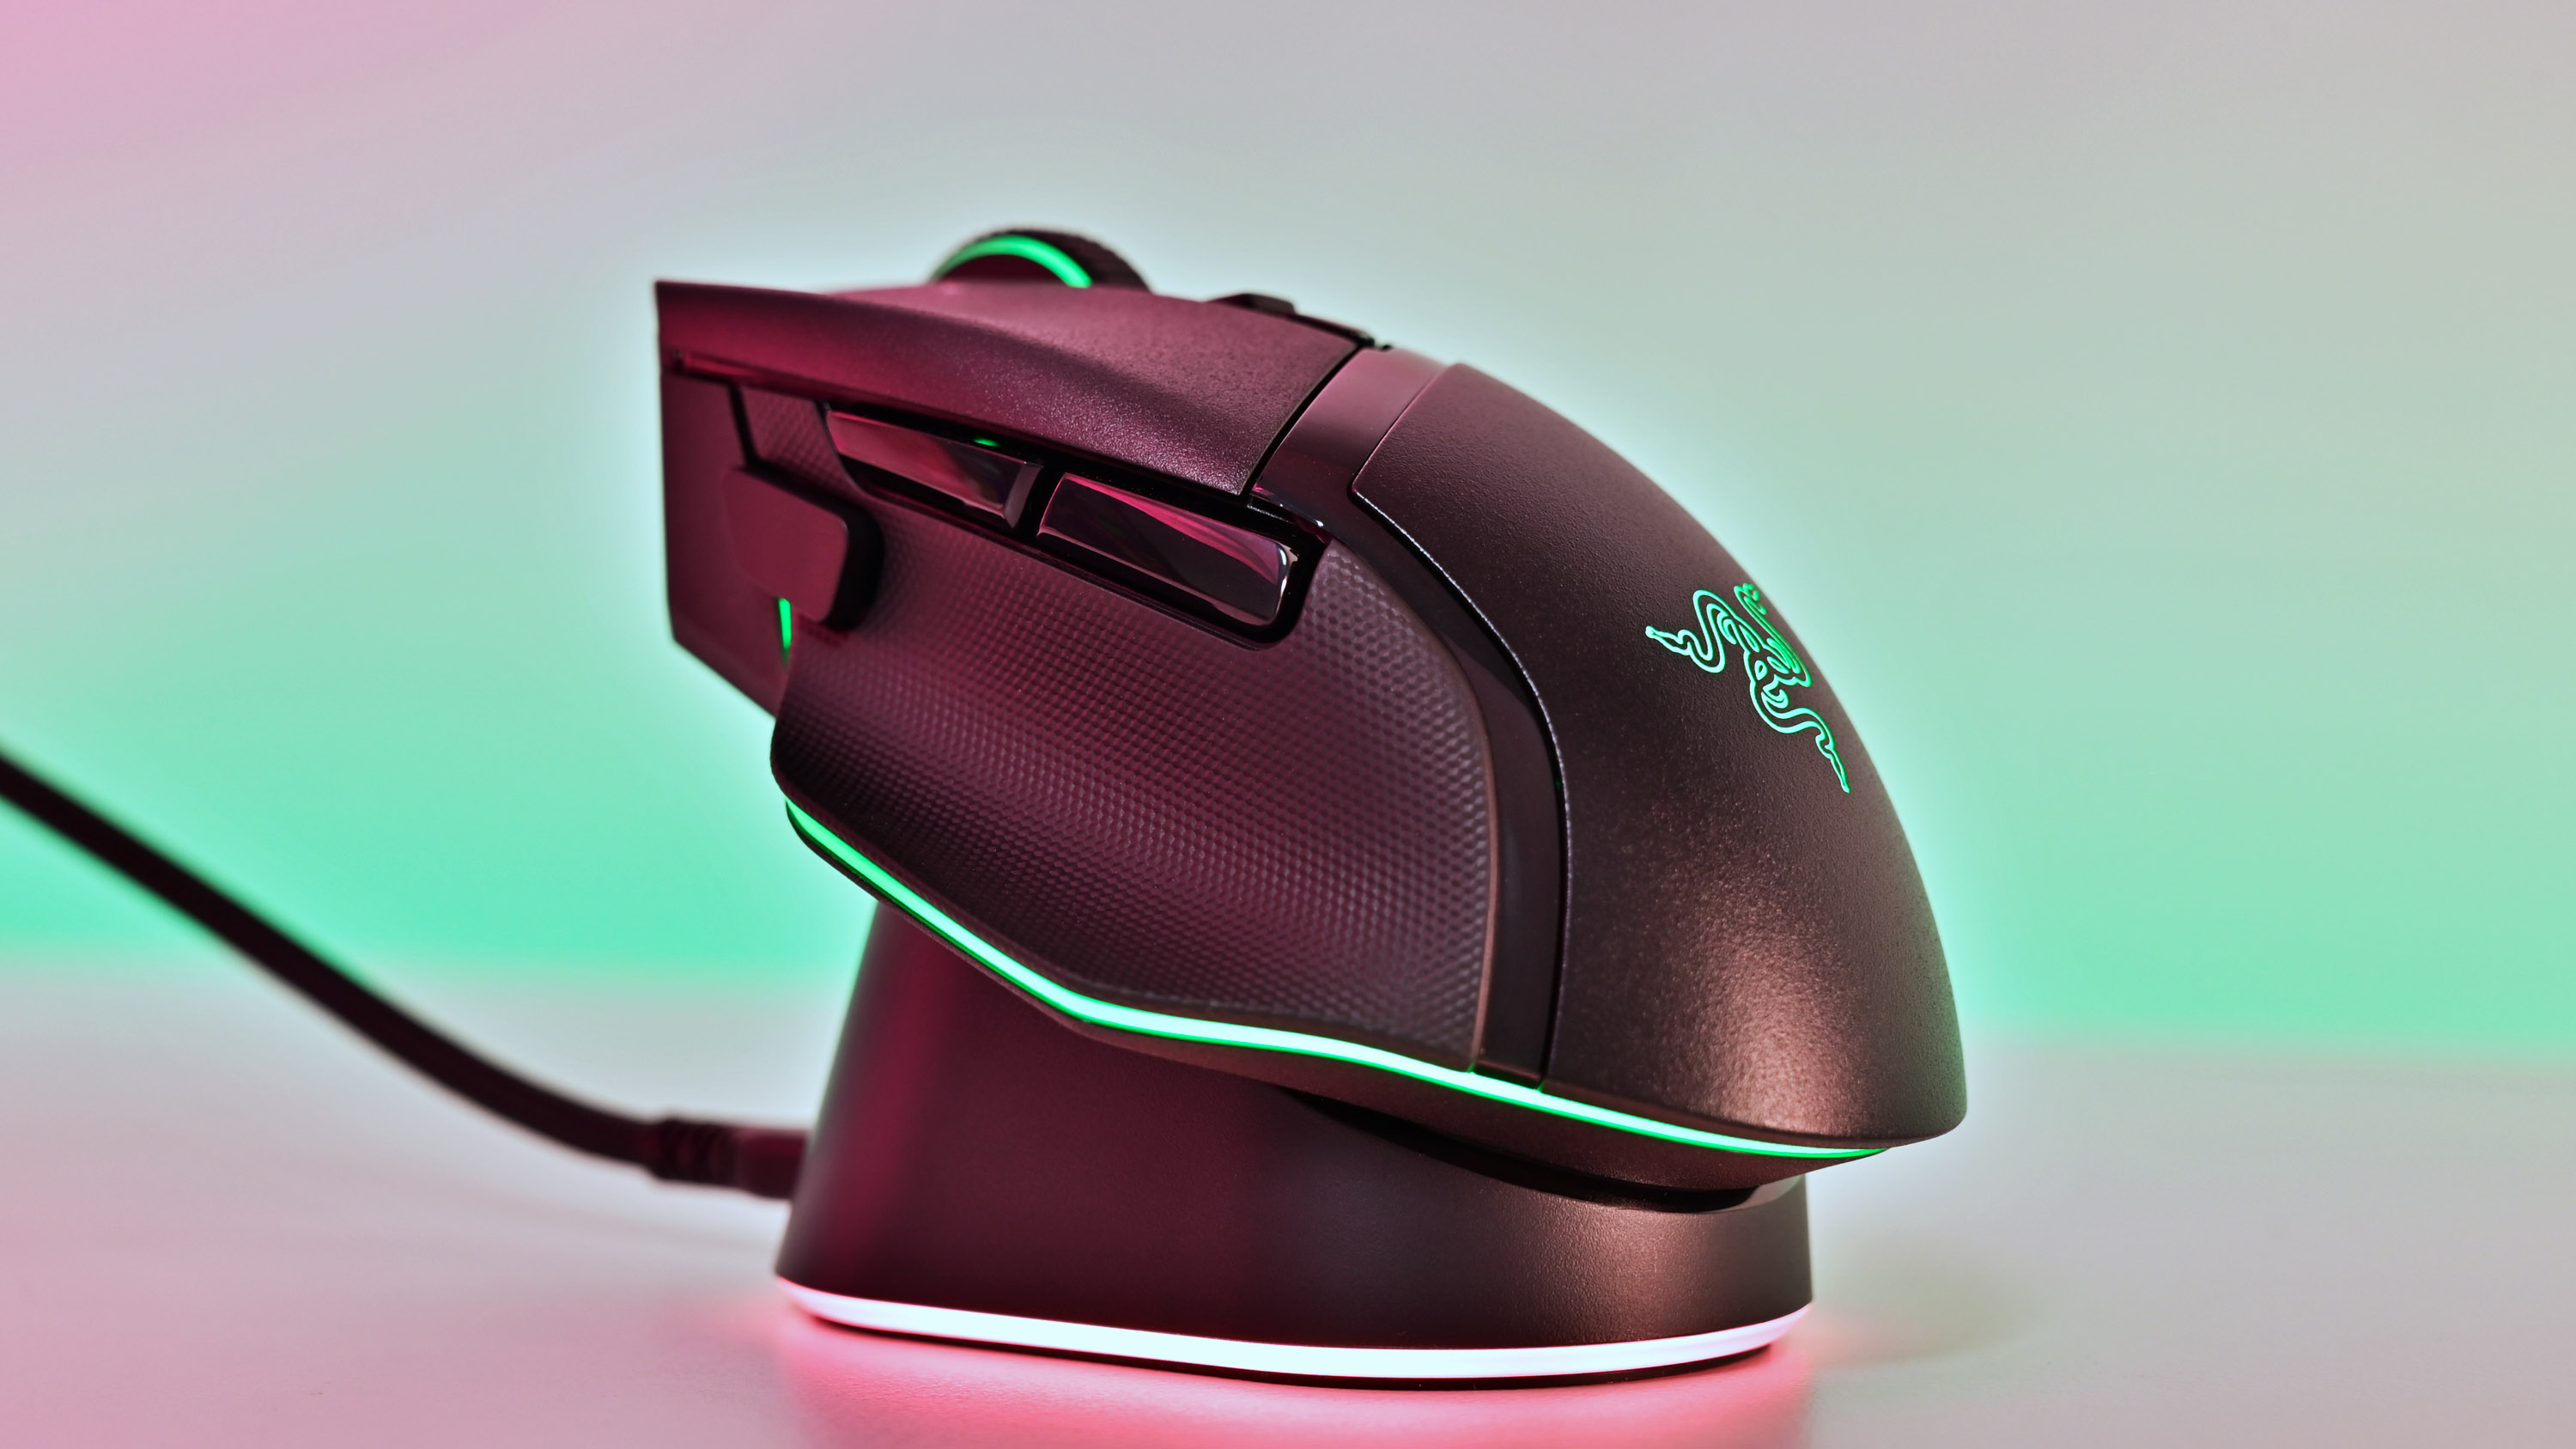 Razer Basilisk V3 Pro and Mouse Dock Pro review: Qi charging and 